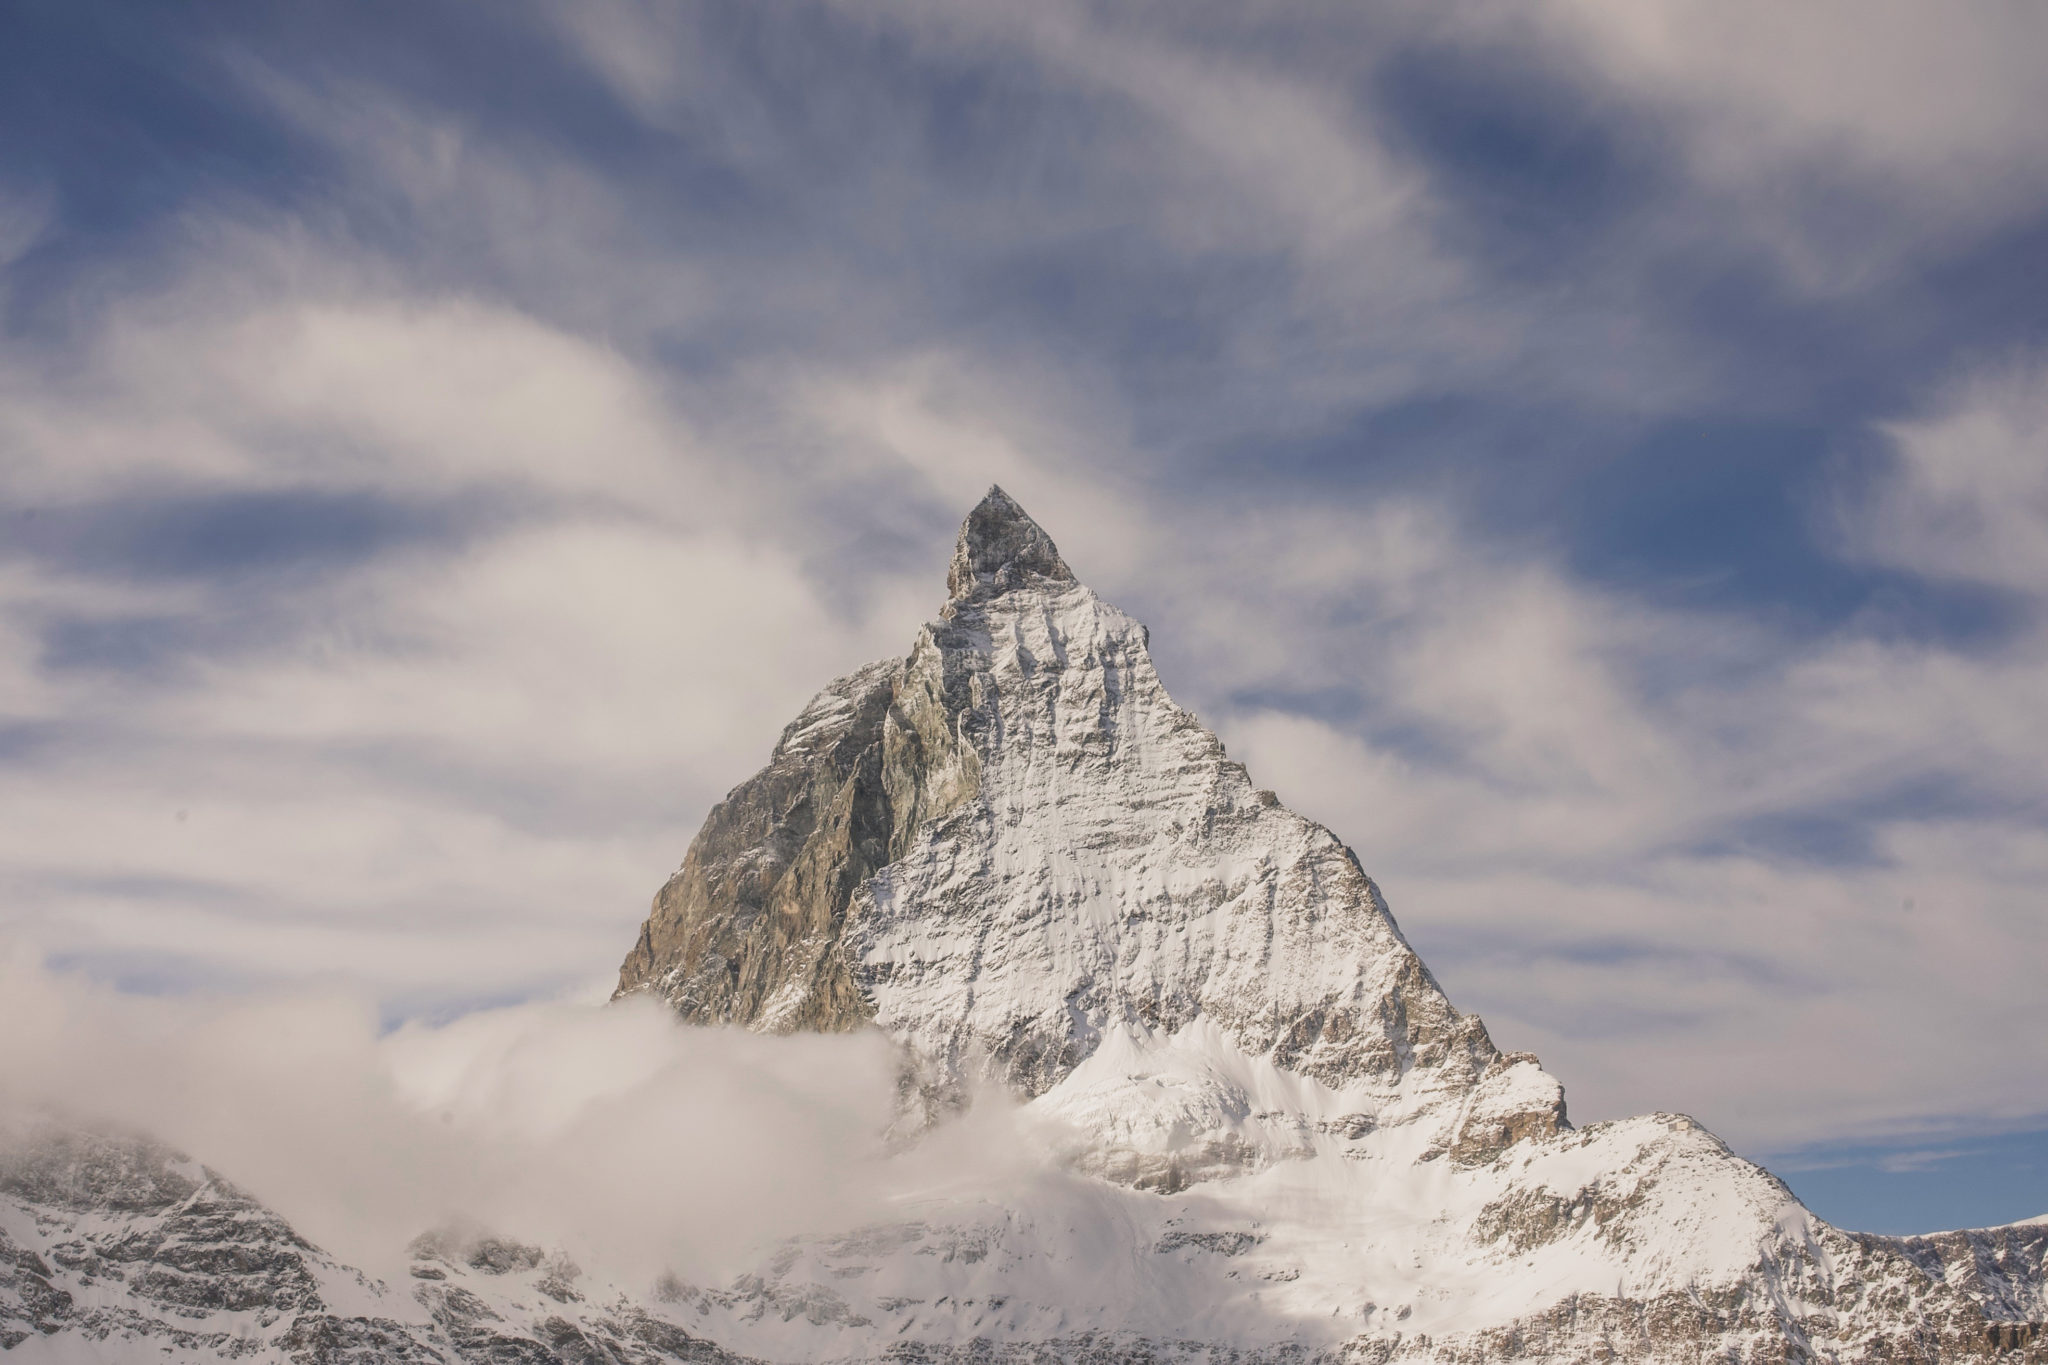 How To See The Matterhorn In Switzerland If You're On A Budget